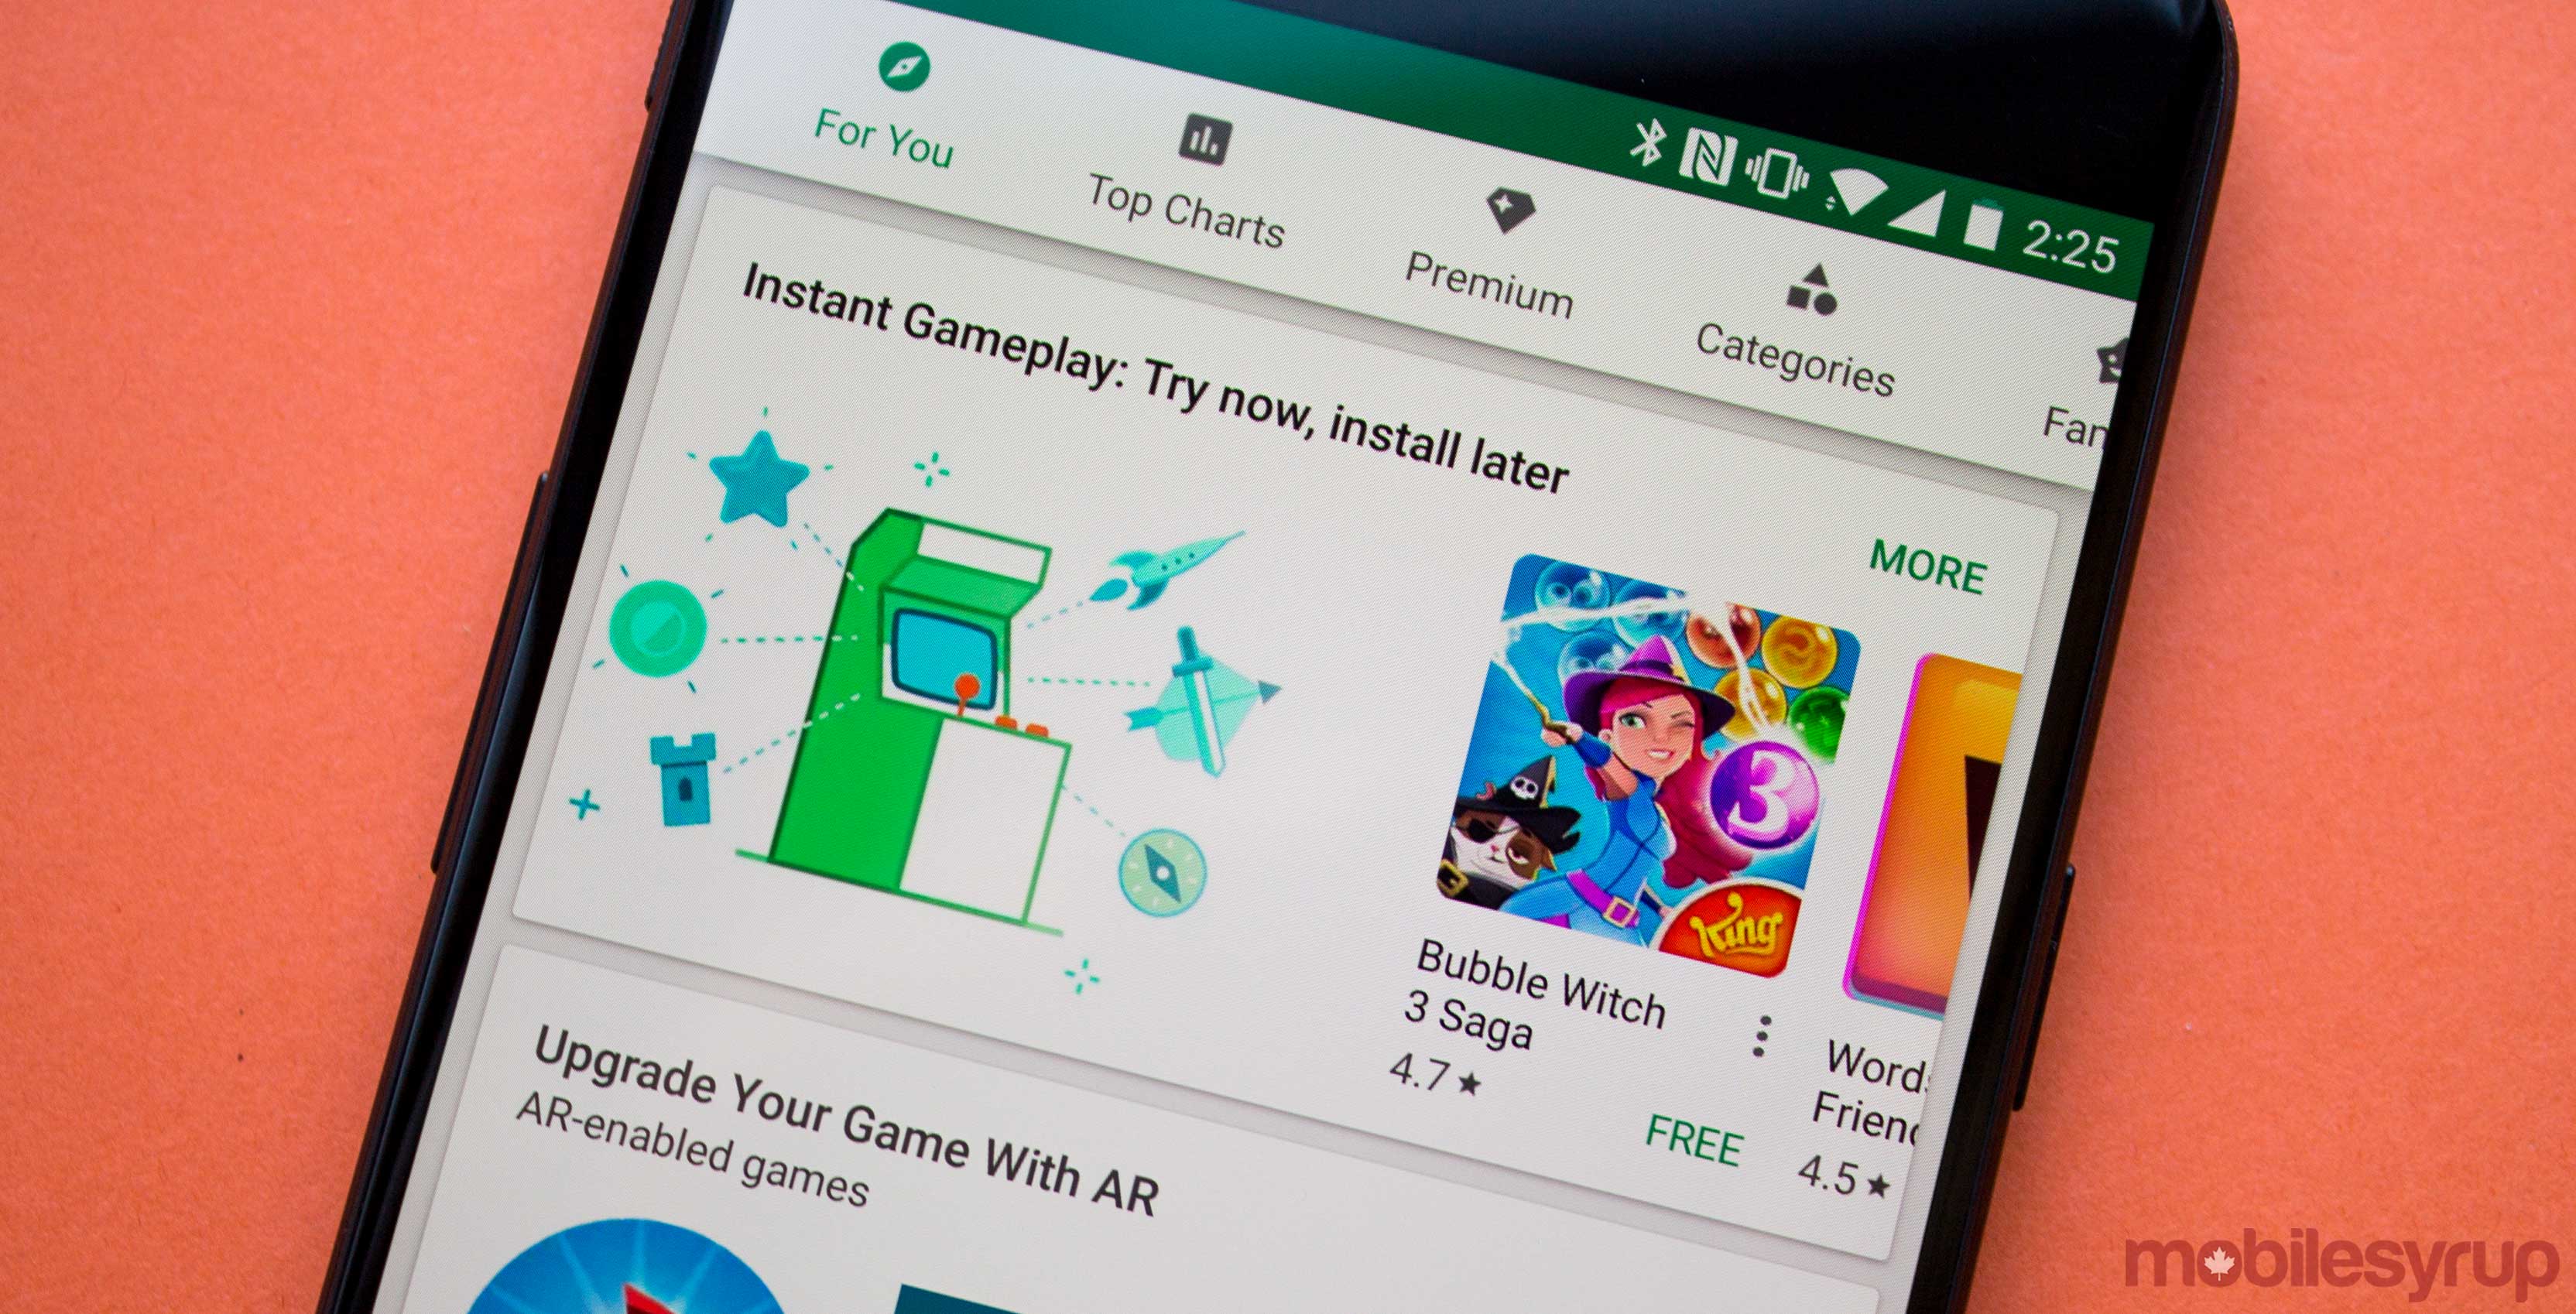 Google Brings Instant App technology to Android gaming